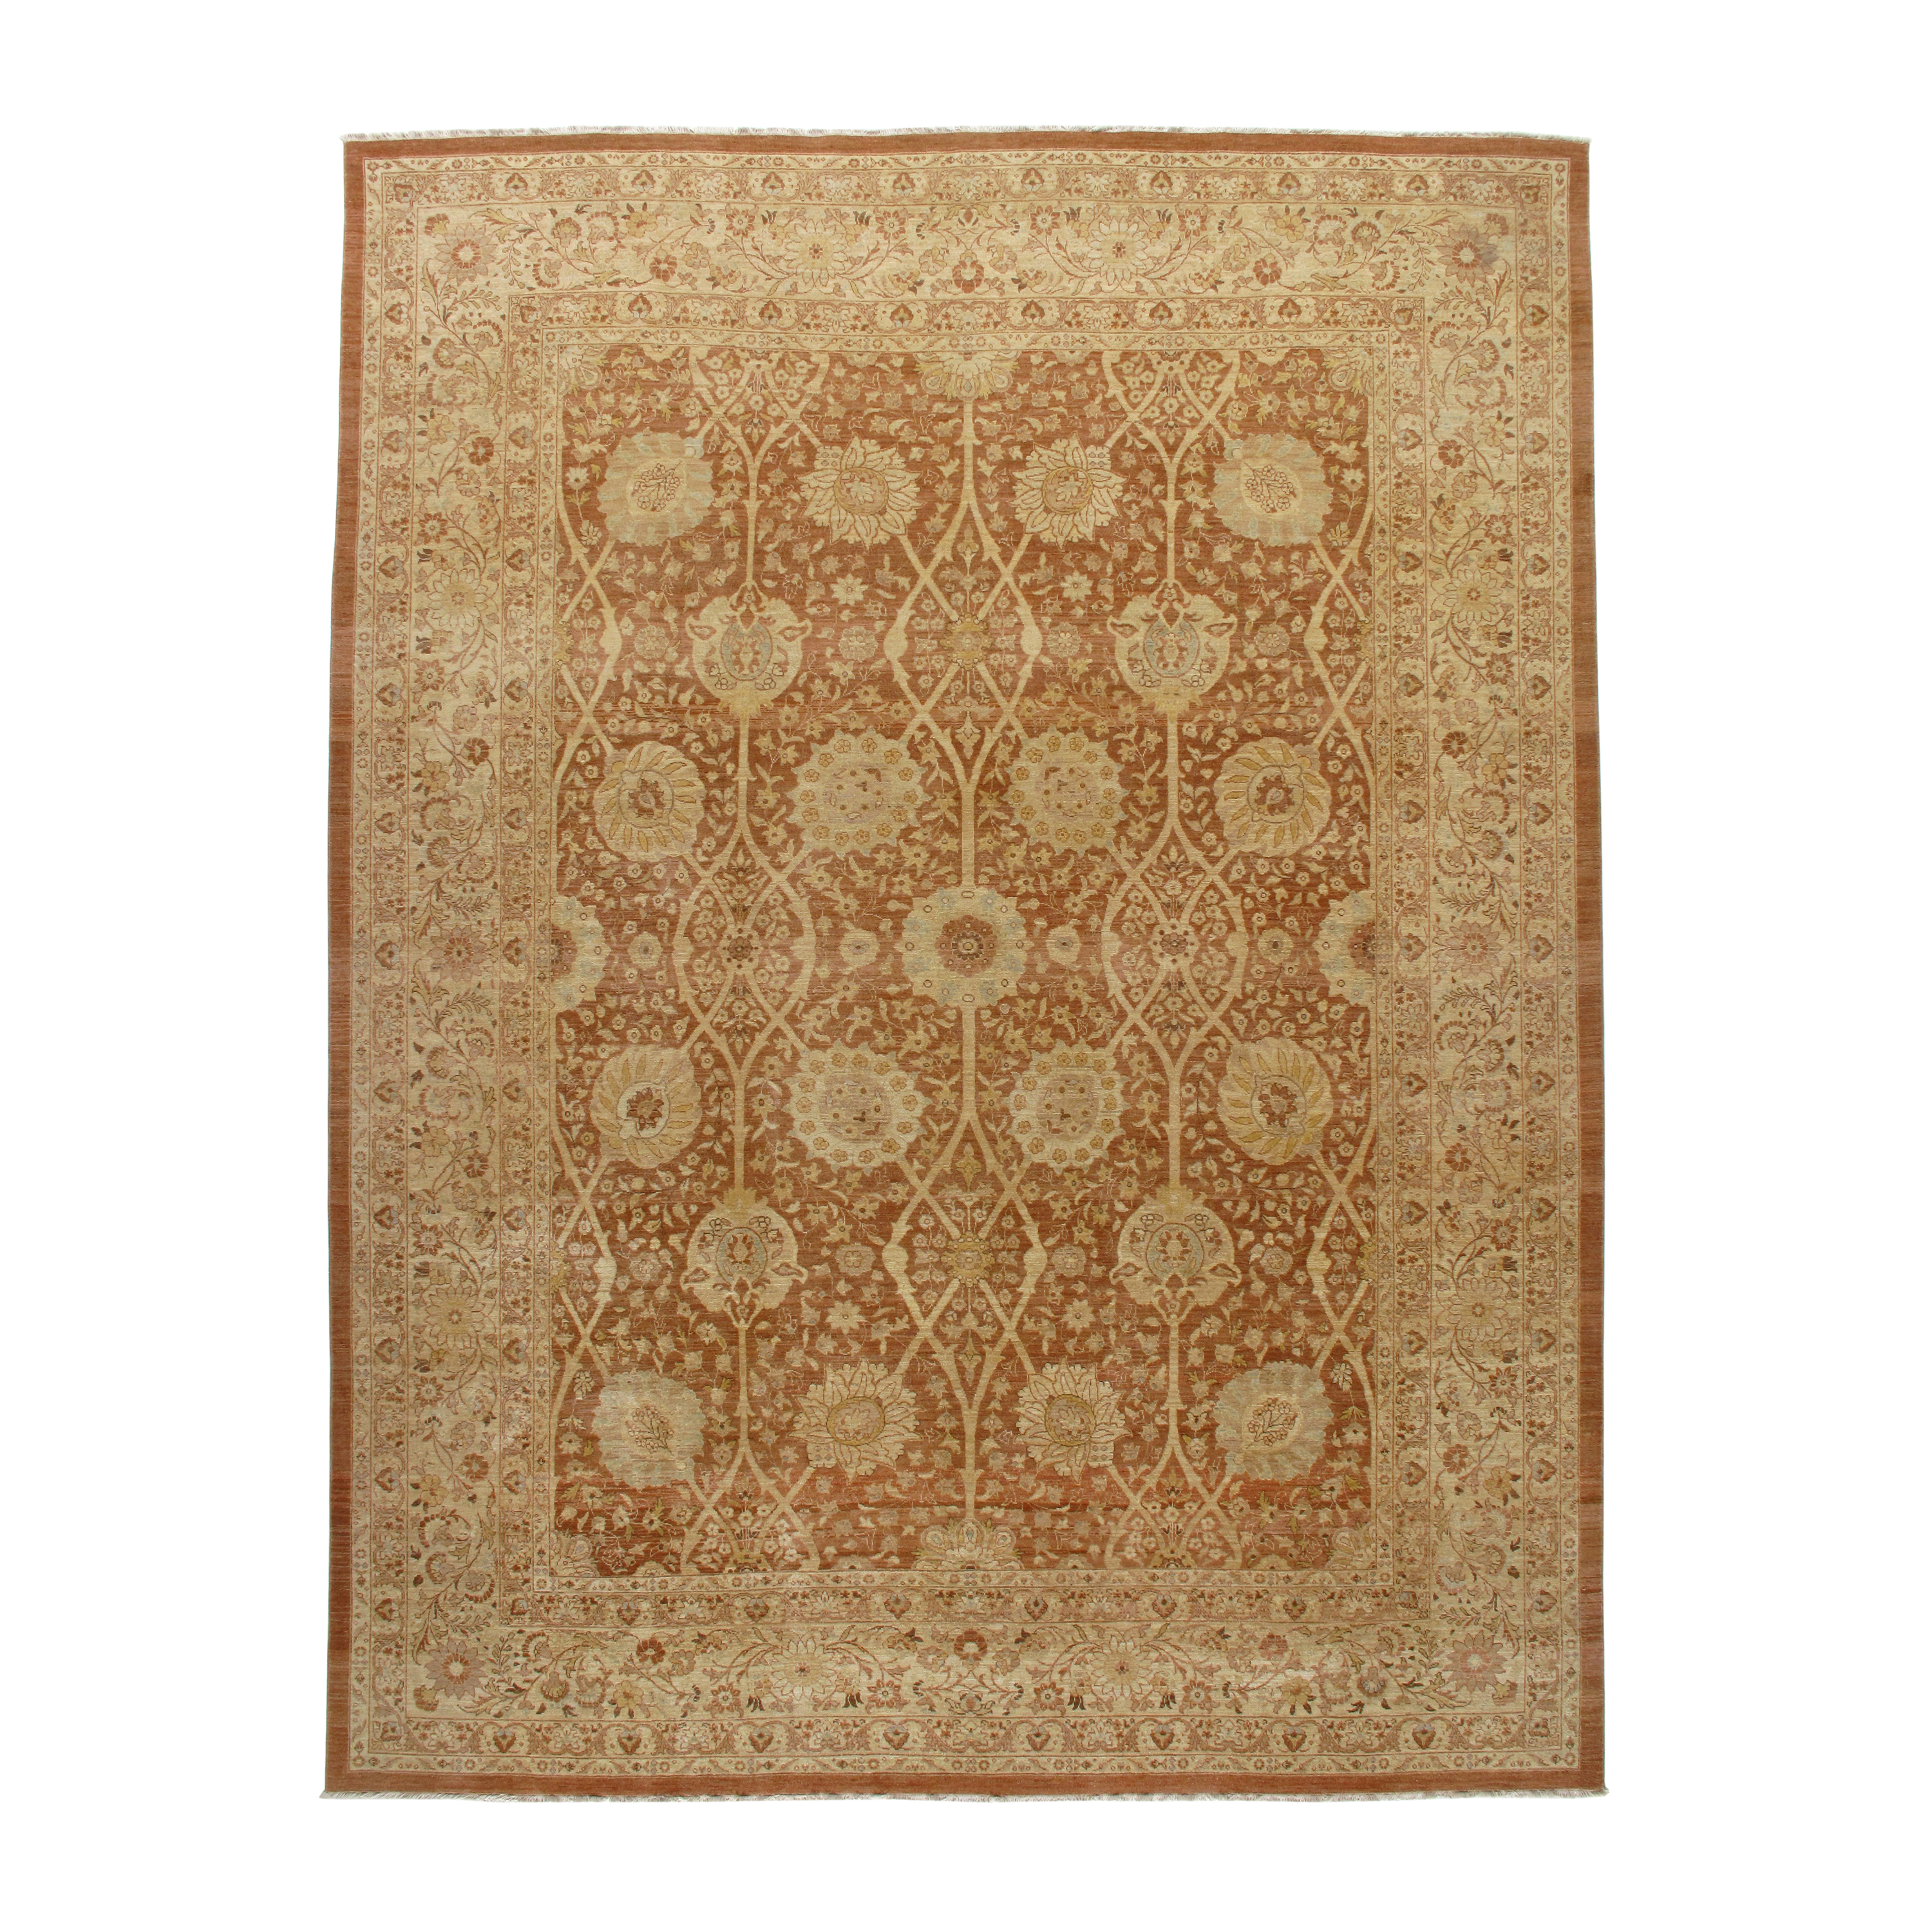 This Persian Tabriz rug is hand made and crafted of 100% wool.